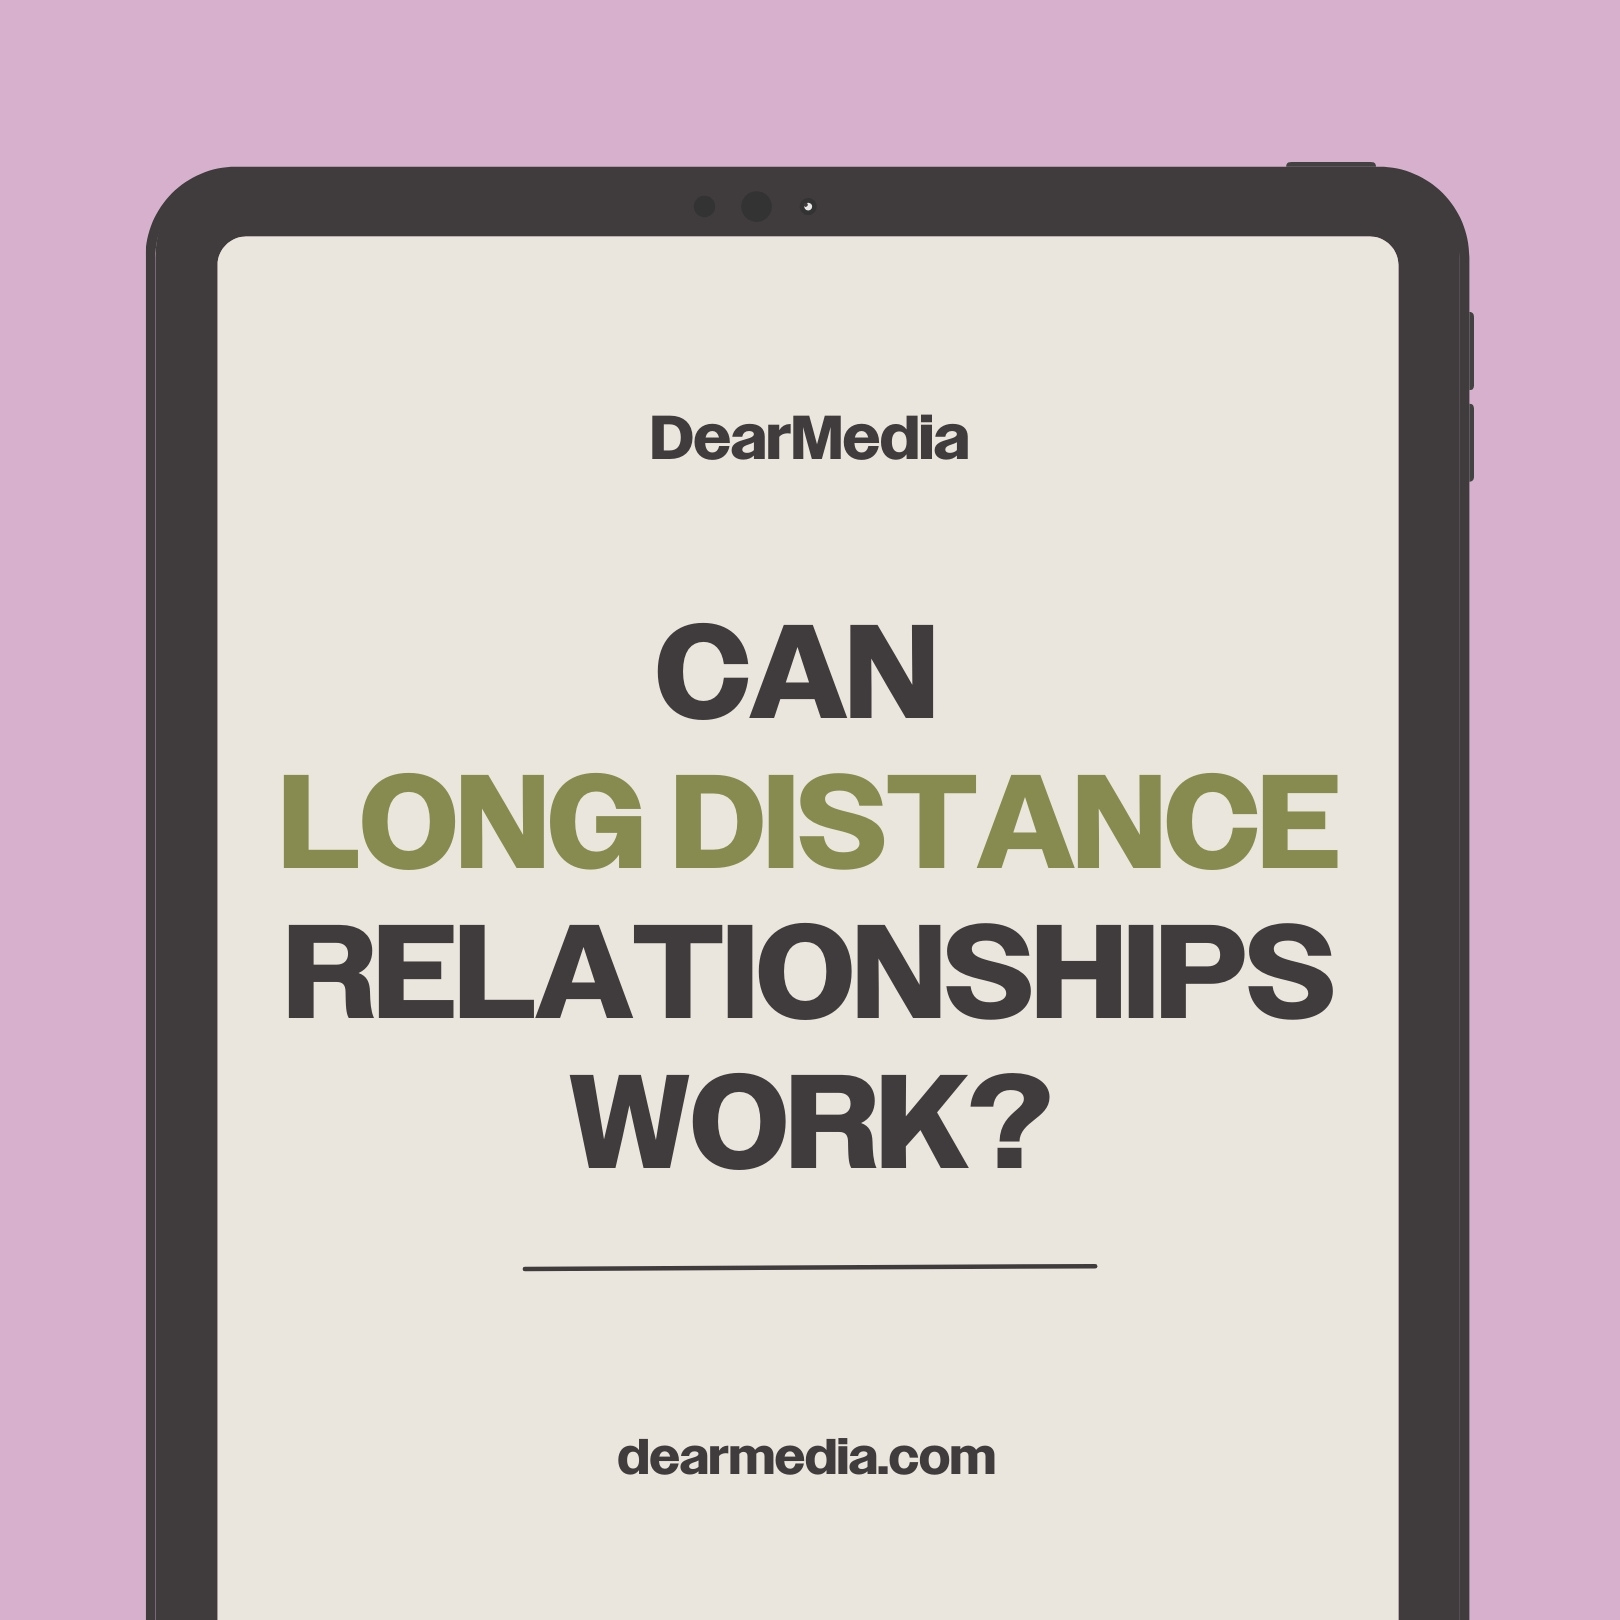 Can Long Distance Relationships Work?